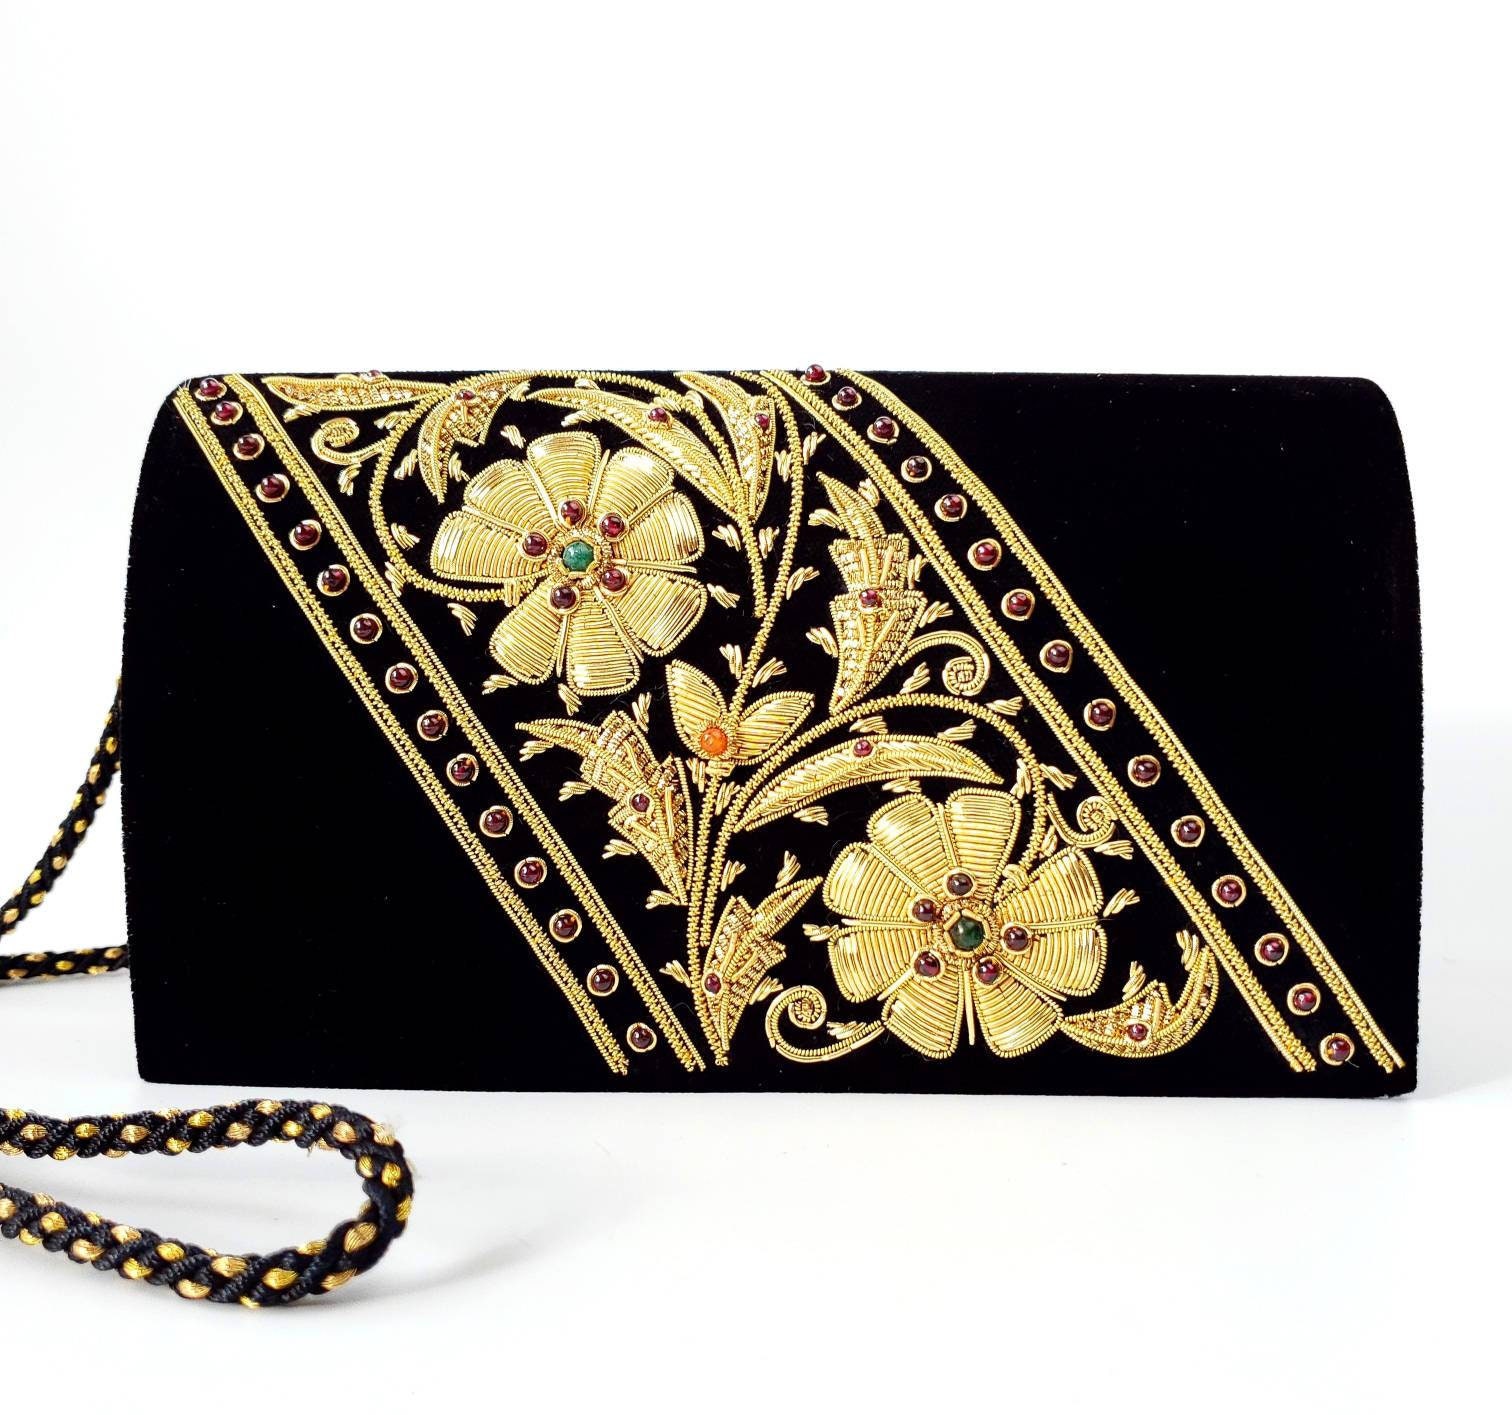 Buy DNE Elegant Party Clutch Bag Chain Sling Bags For Womens/Girls (Black)  Online In India At Discounted Prices